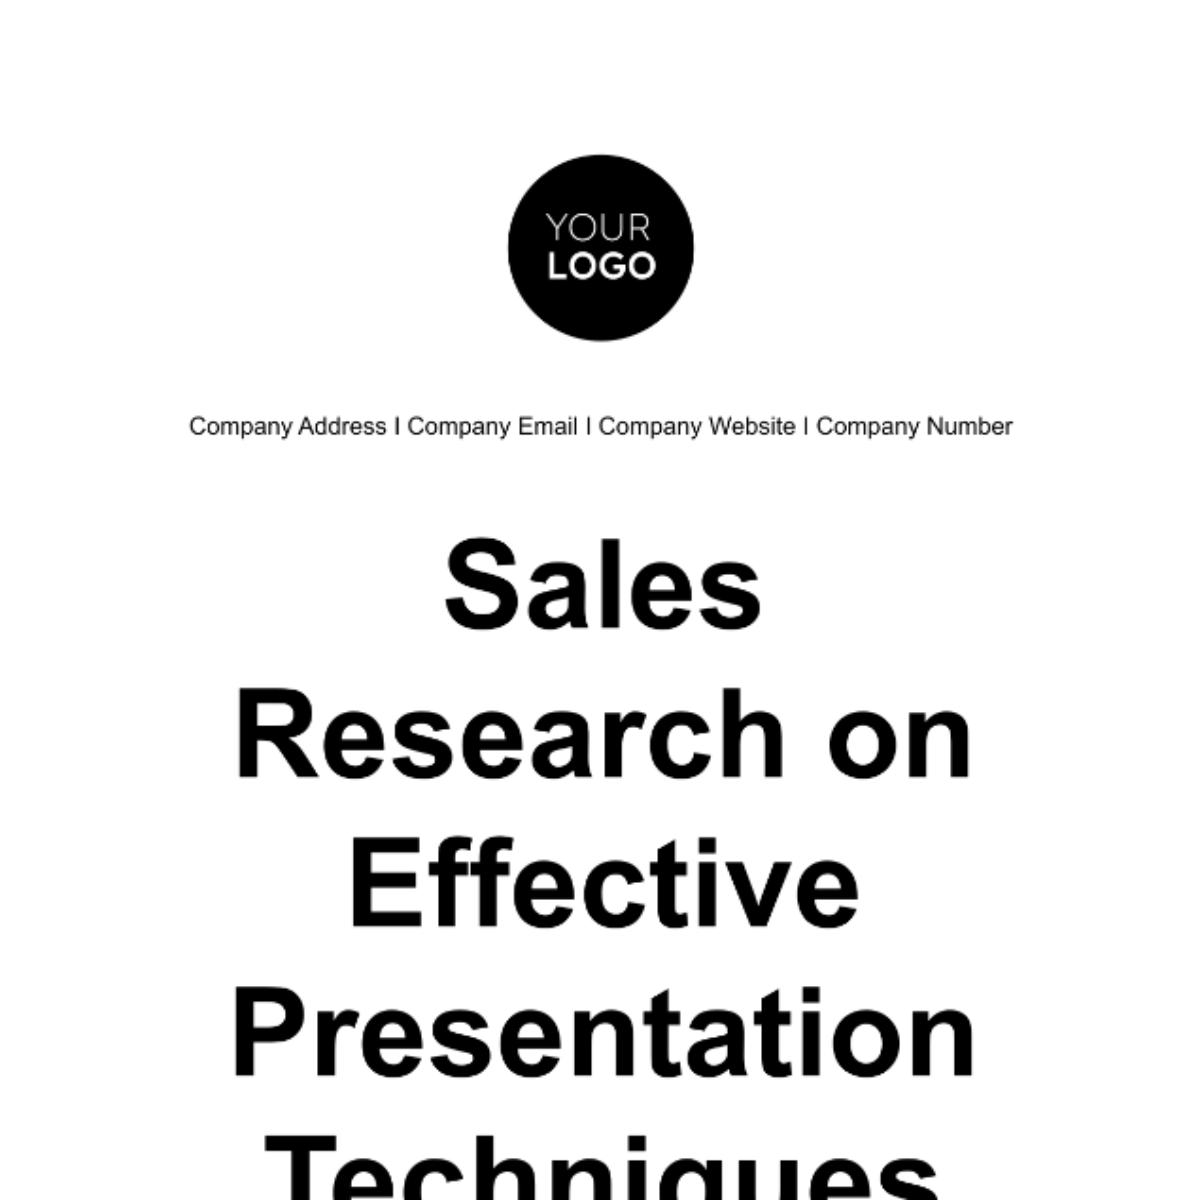 Free Sales Research on Effective Presentation Techniques Template